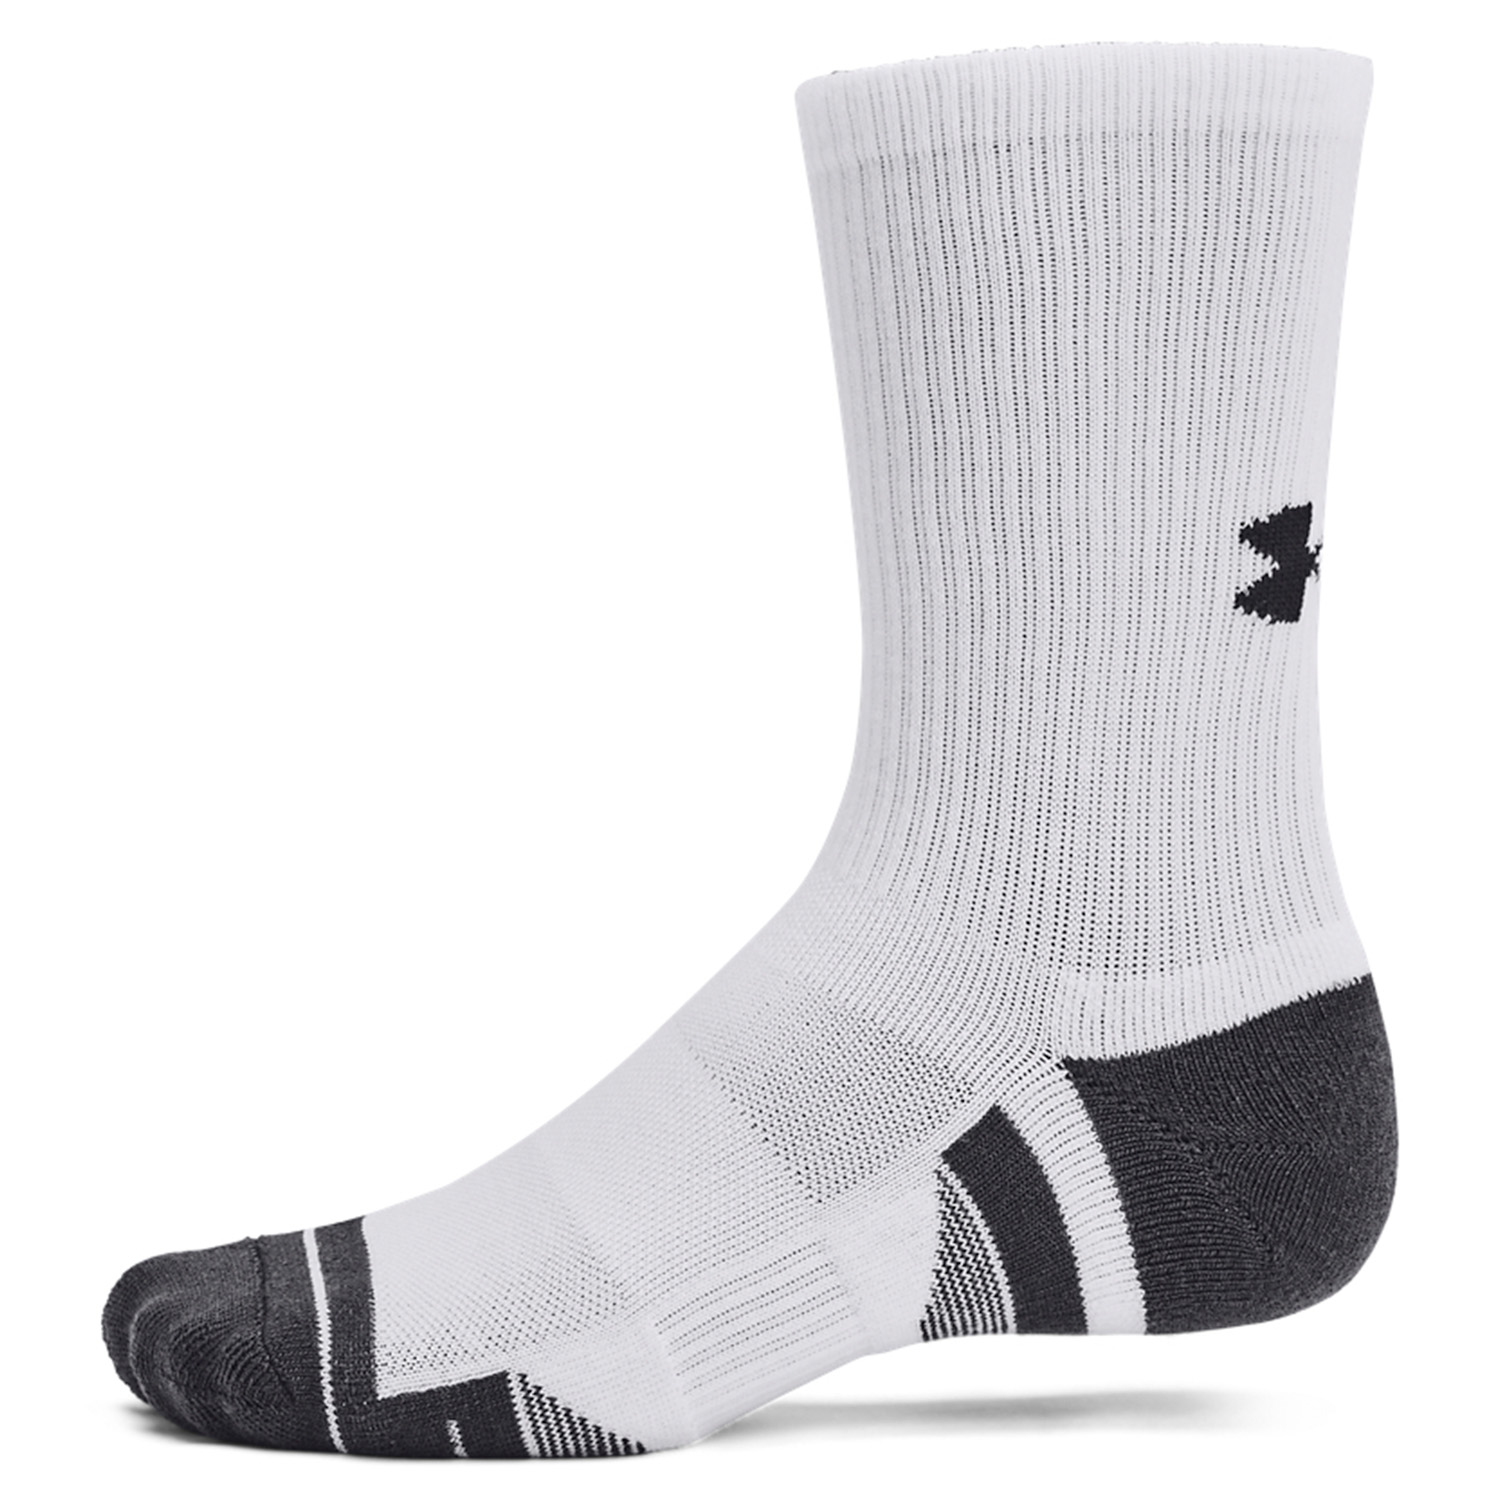 Image of Under Armour Performance Tech 3 Pack Crew Socks